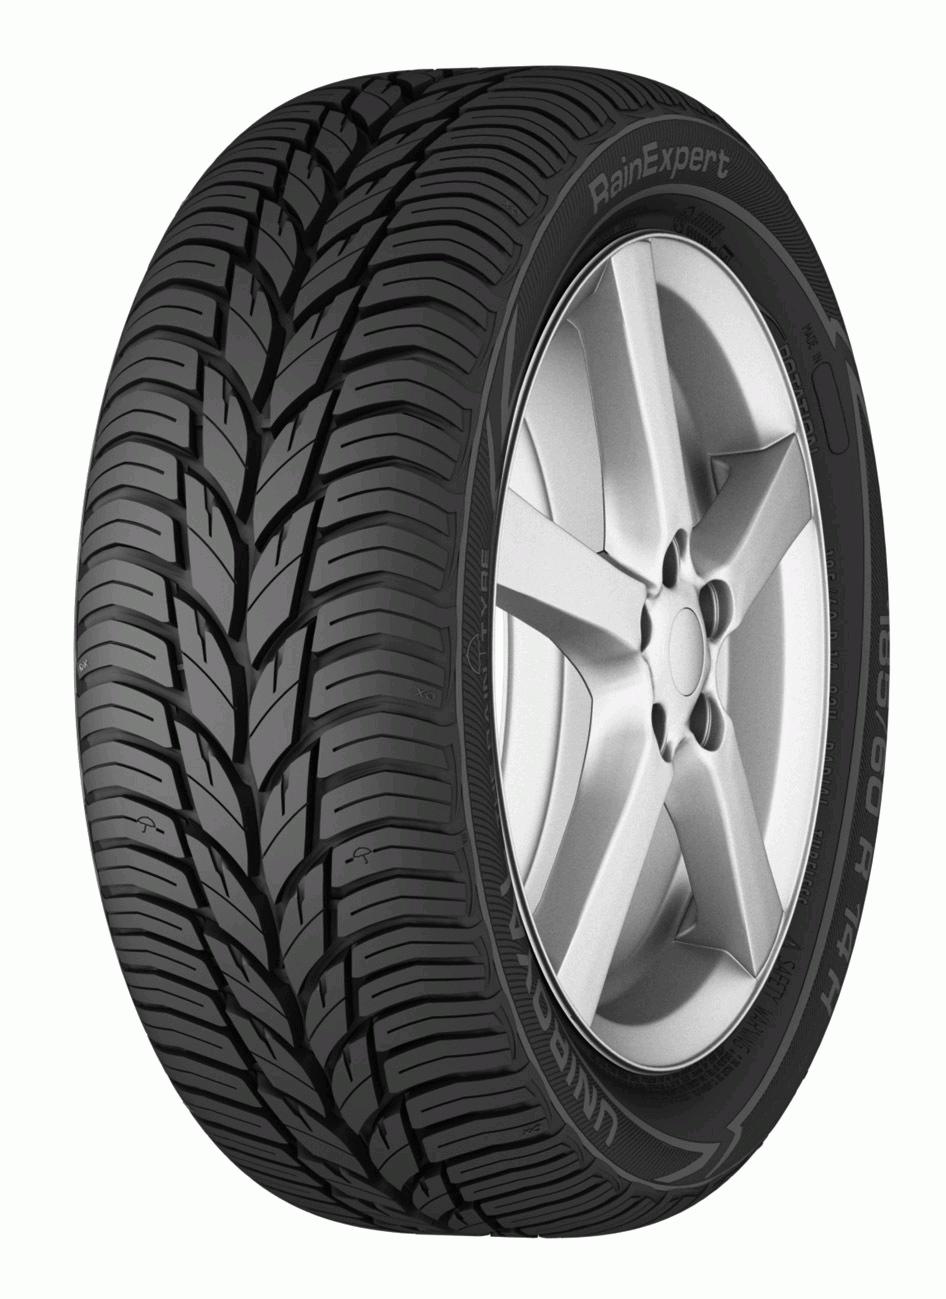 Uniroyal RainExpert - Tyre Reviews Tests and